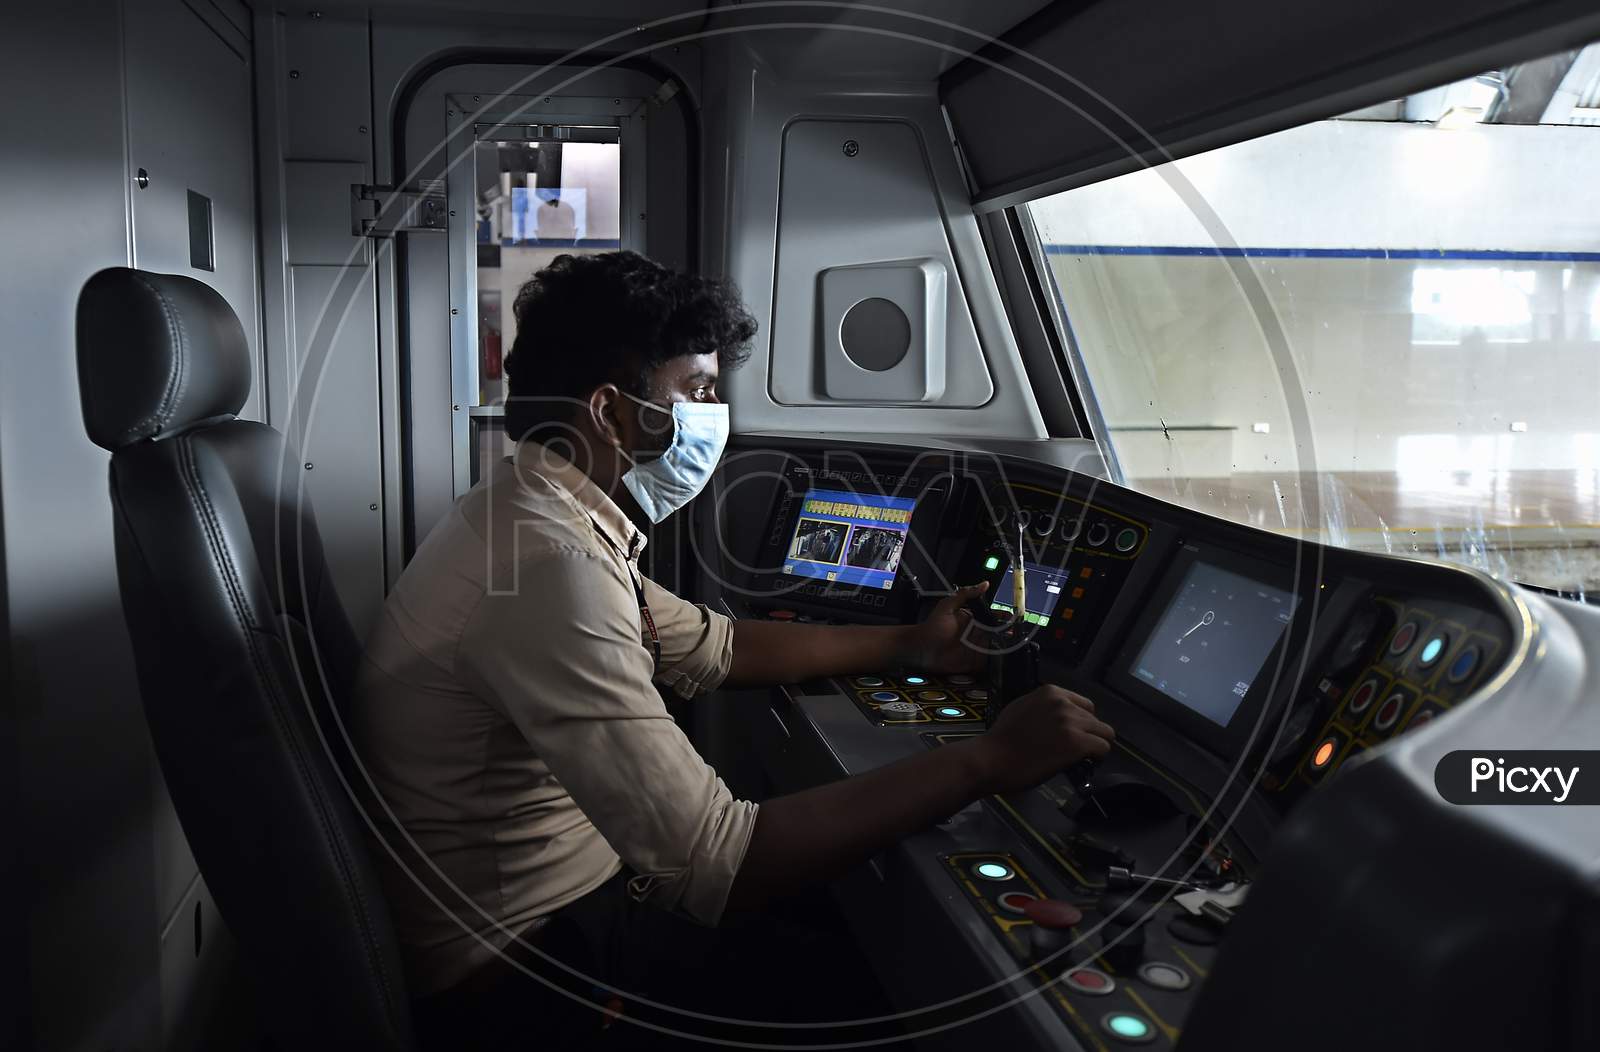 A Driver Operates A Metro Train Following Resumption Of Chennai Metro Services After Over Five Months Suspension Due To Covid-19 Outbreak, In Chennai,Tuesday, September 08, 2020.